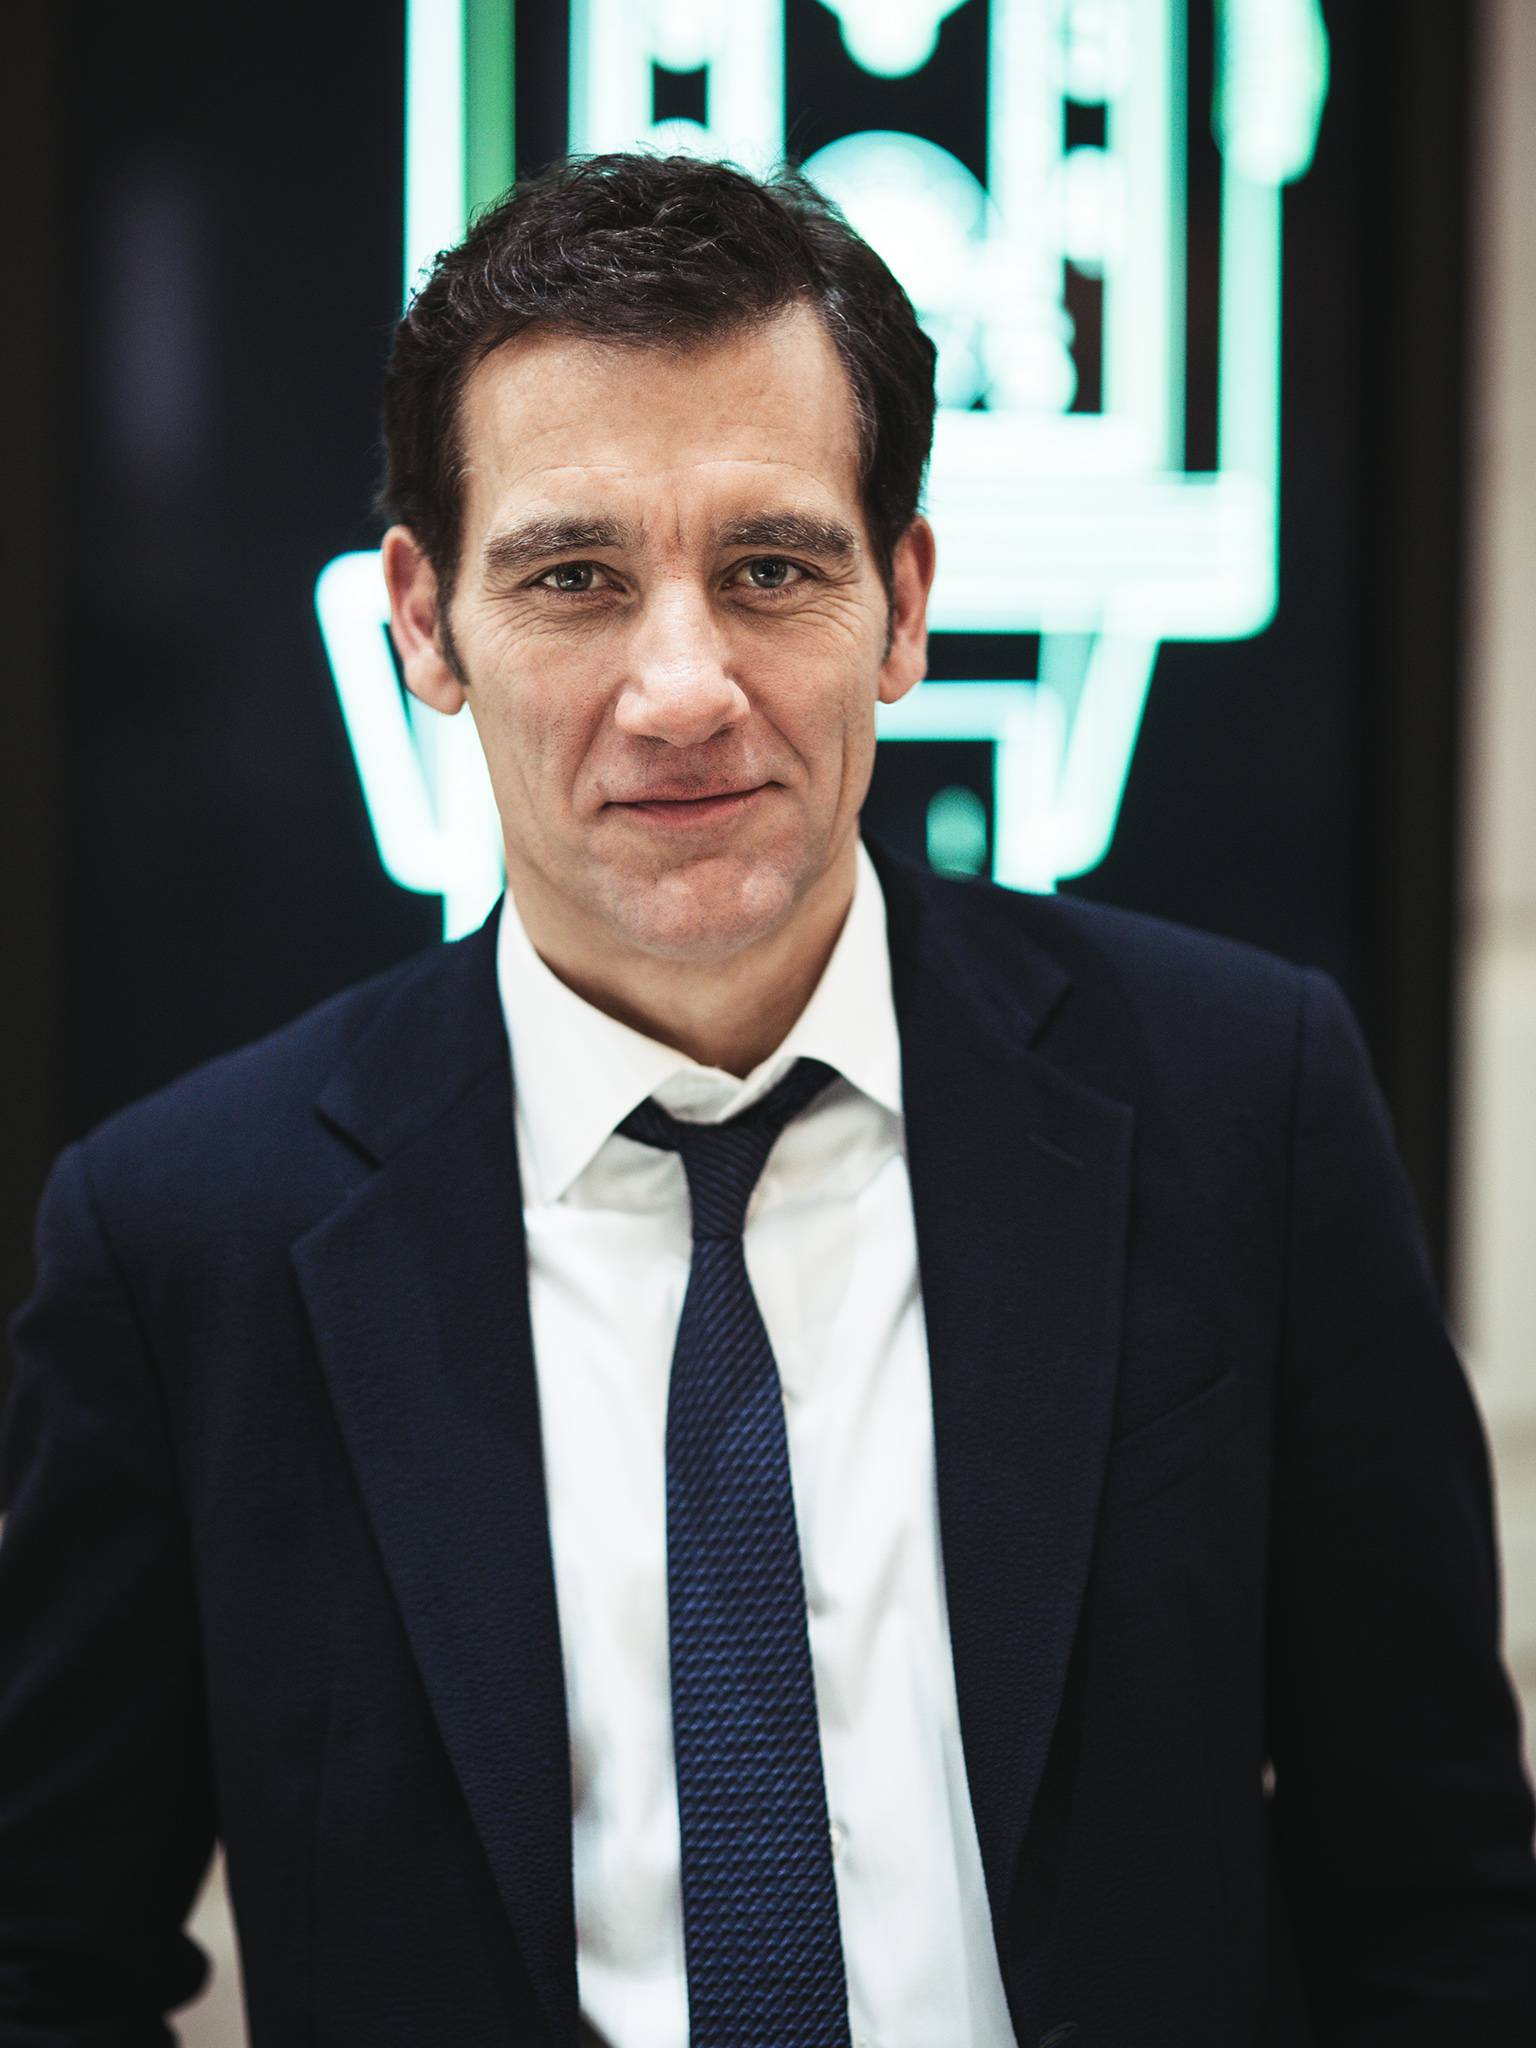 In Conversation With Clive Owen: On The Iconic Reverso, His Style Icon, And His Love Of Theater